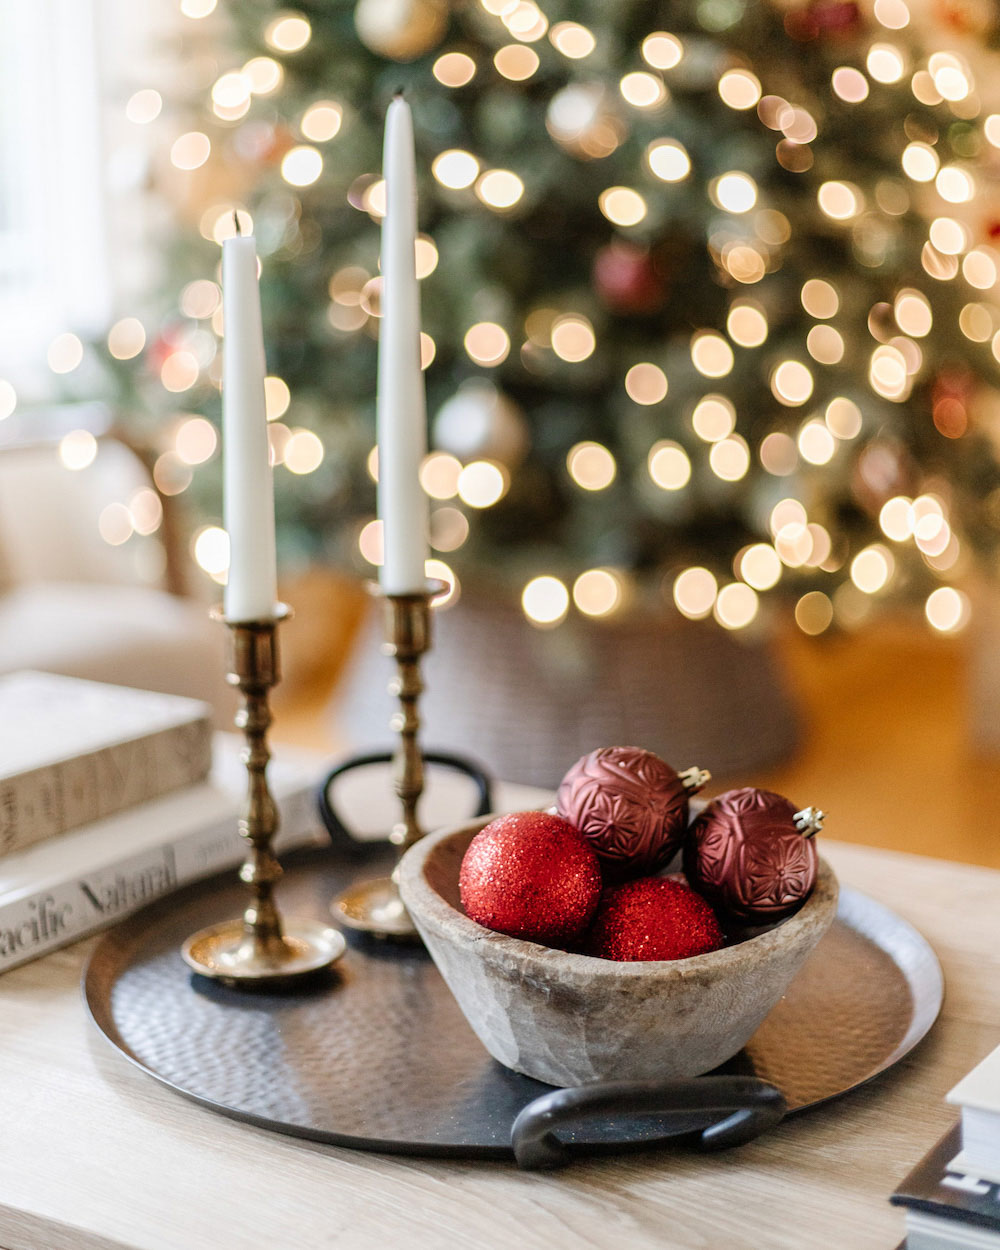 Close up image of a bowl of ornaments and two white candle sticks placed on a coffee table with blurred Christmas lights in the background